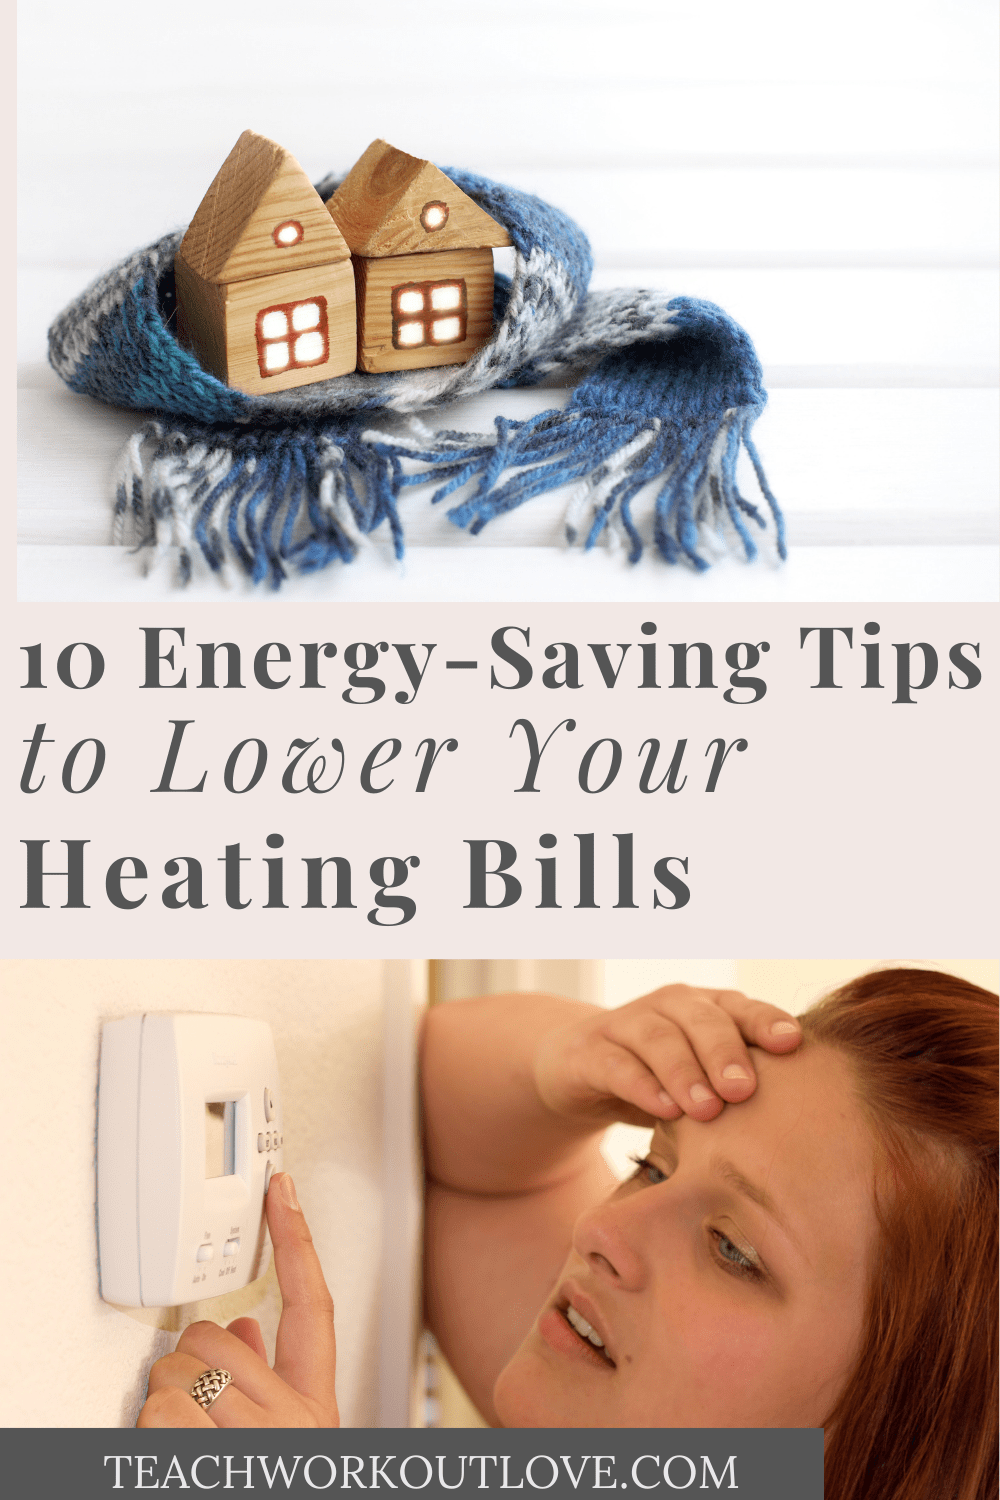 Although your heating bills will inevitably increase during the colder months, you can reduce the cost with these energy-saving techniques.